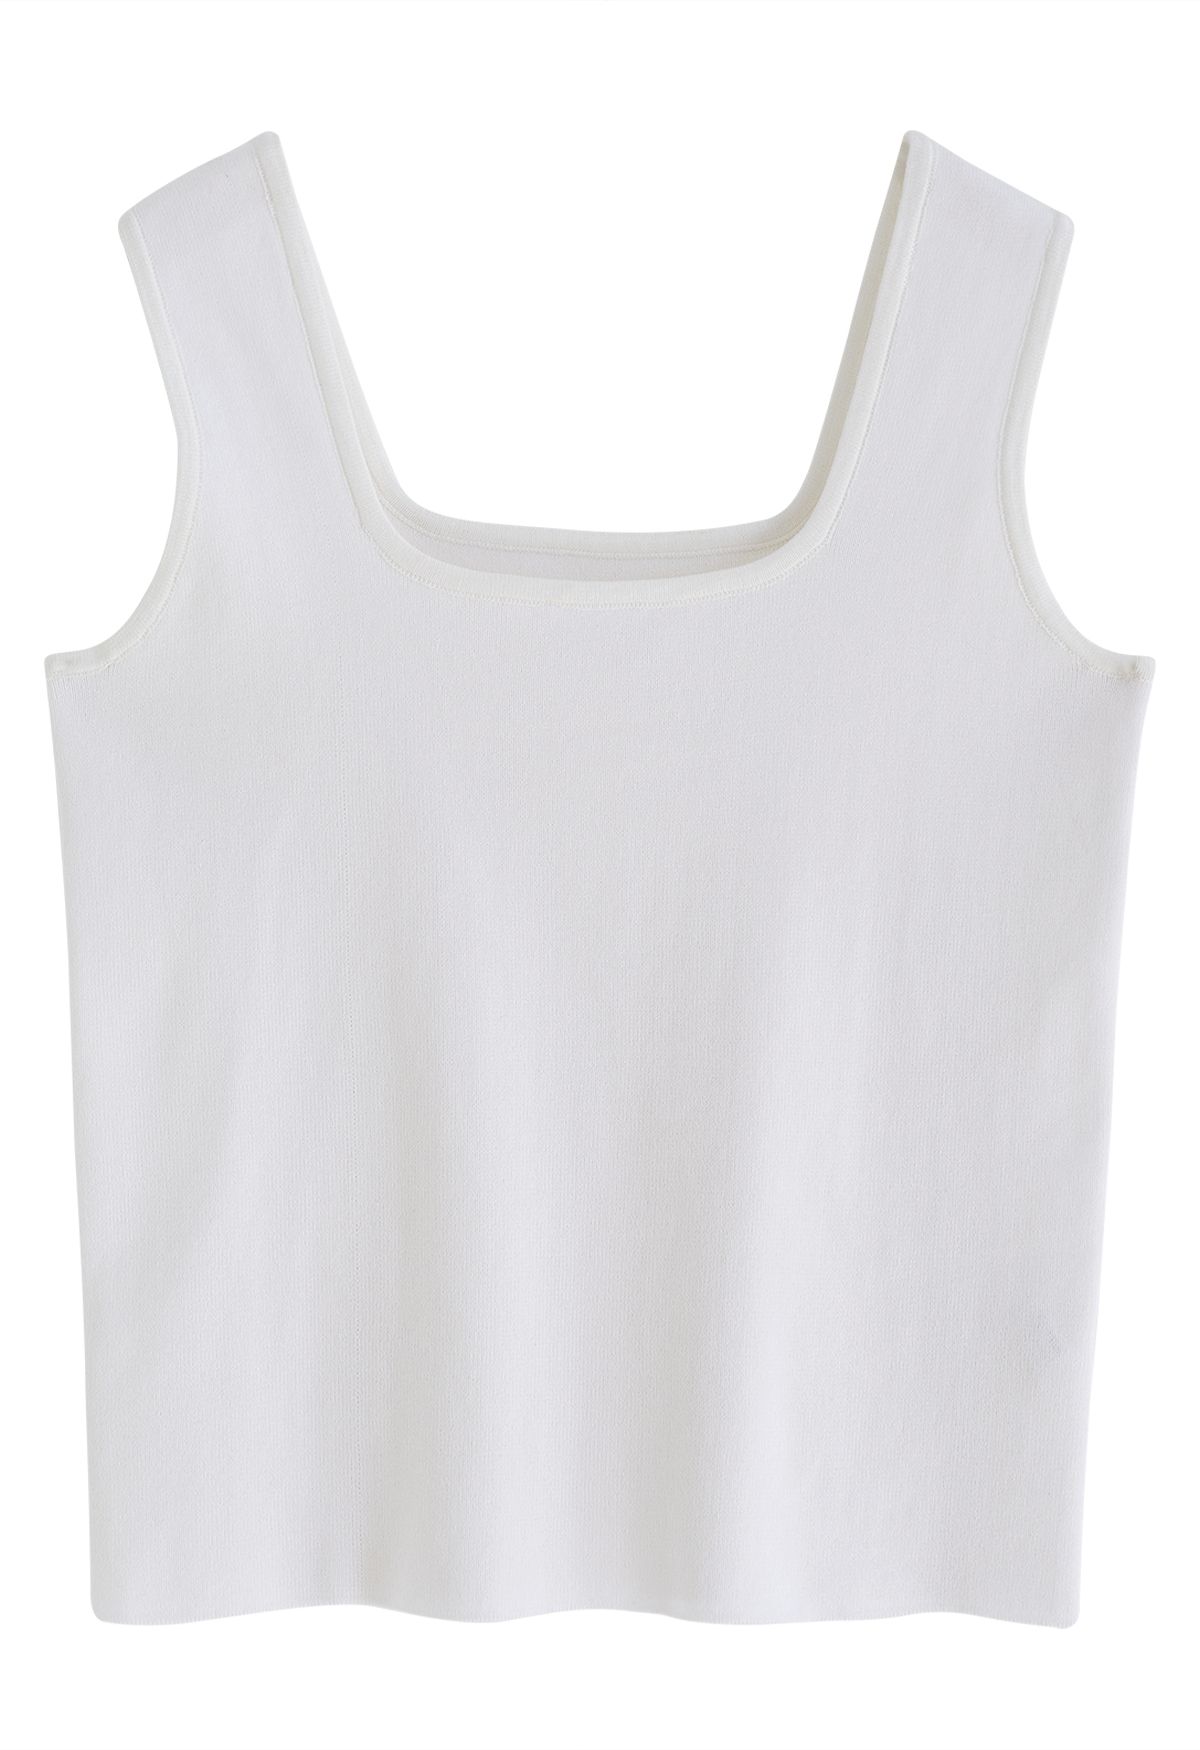 Chic Square Neck Knit Tank Top in White